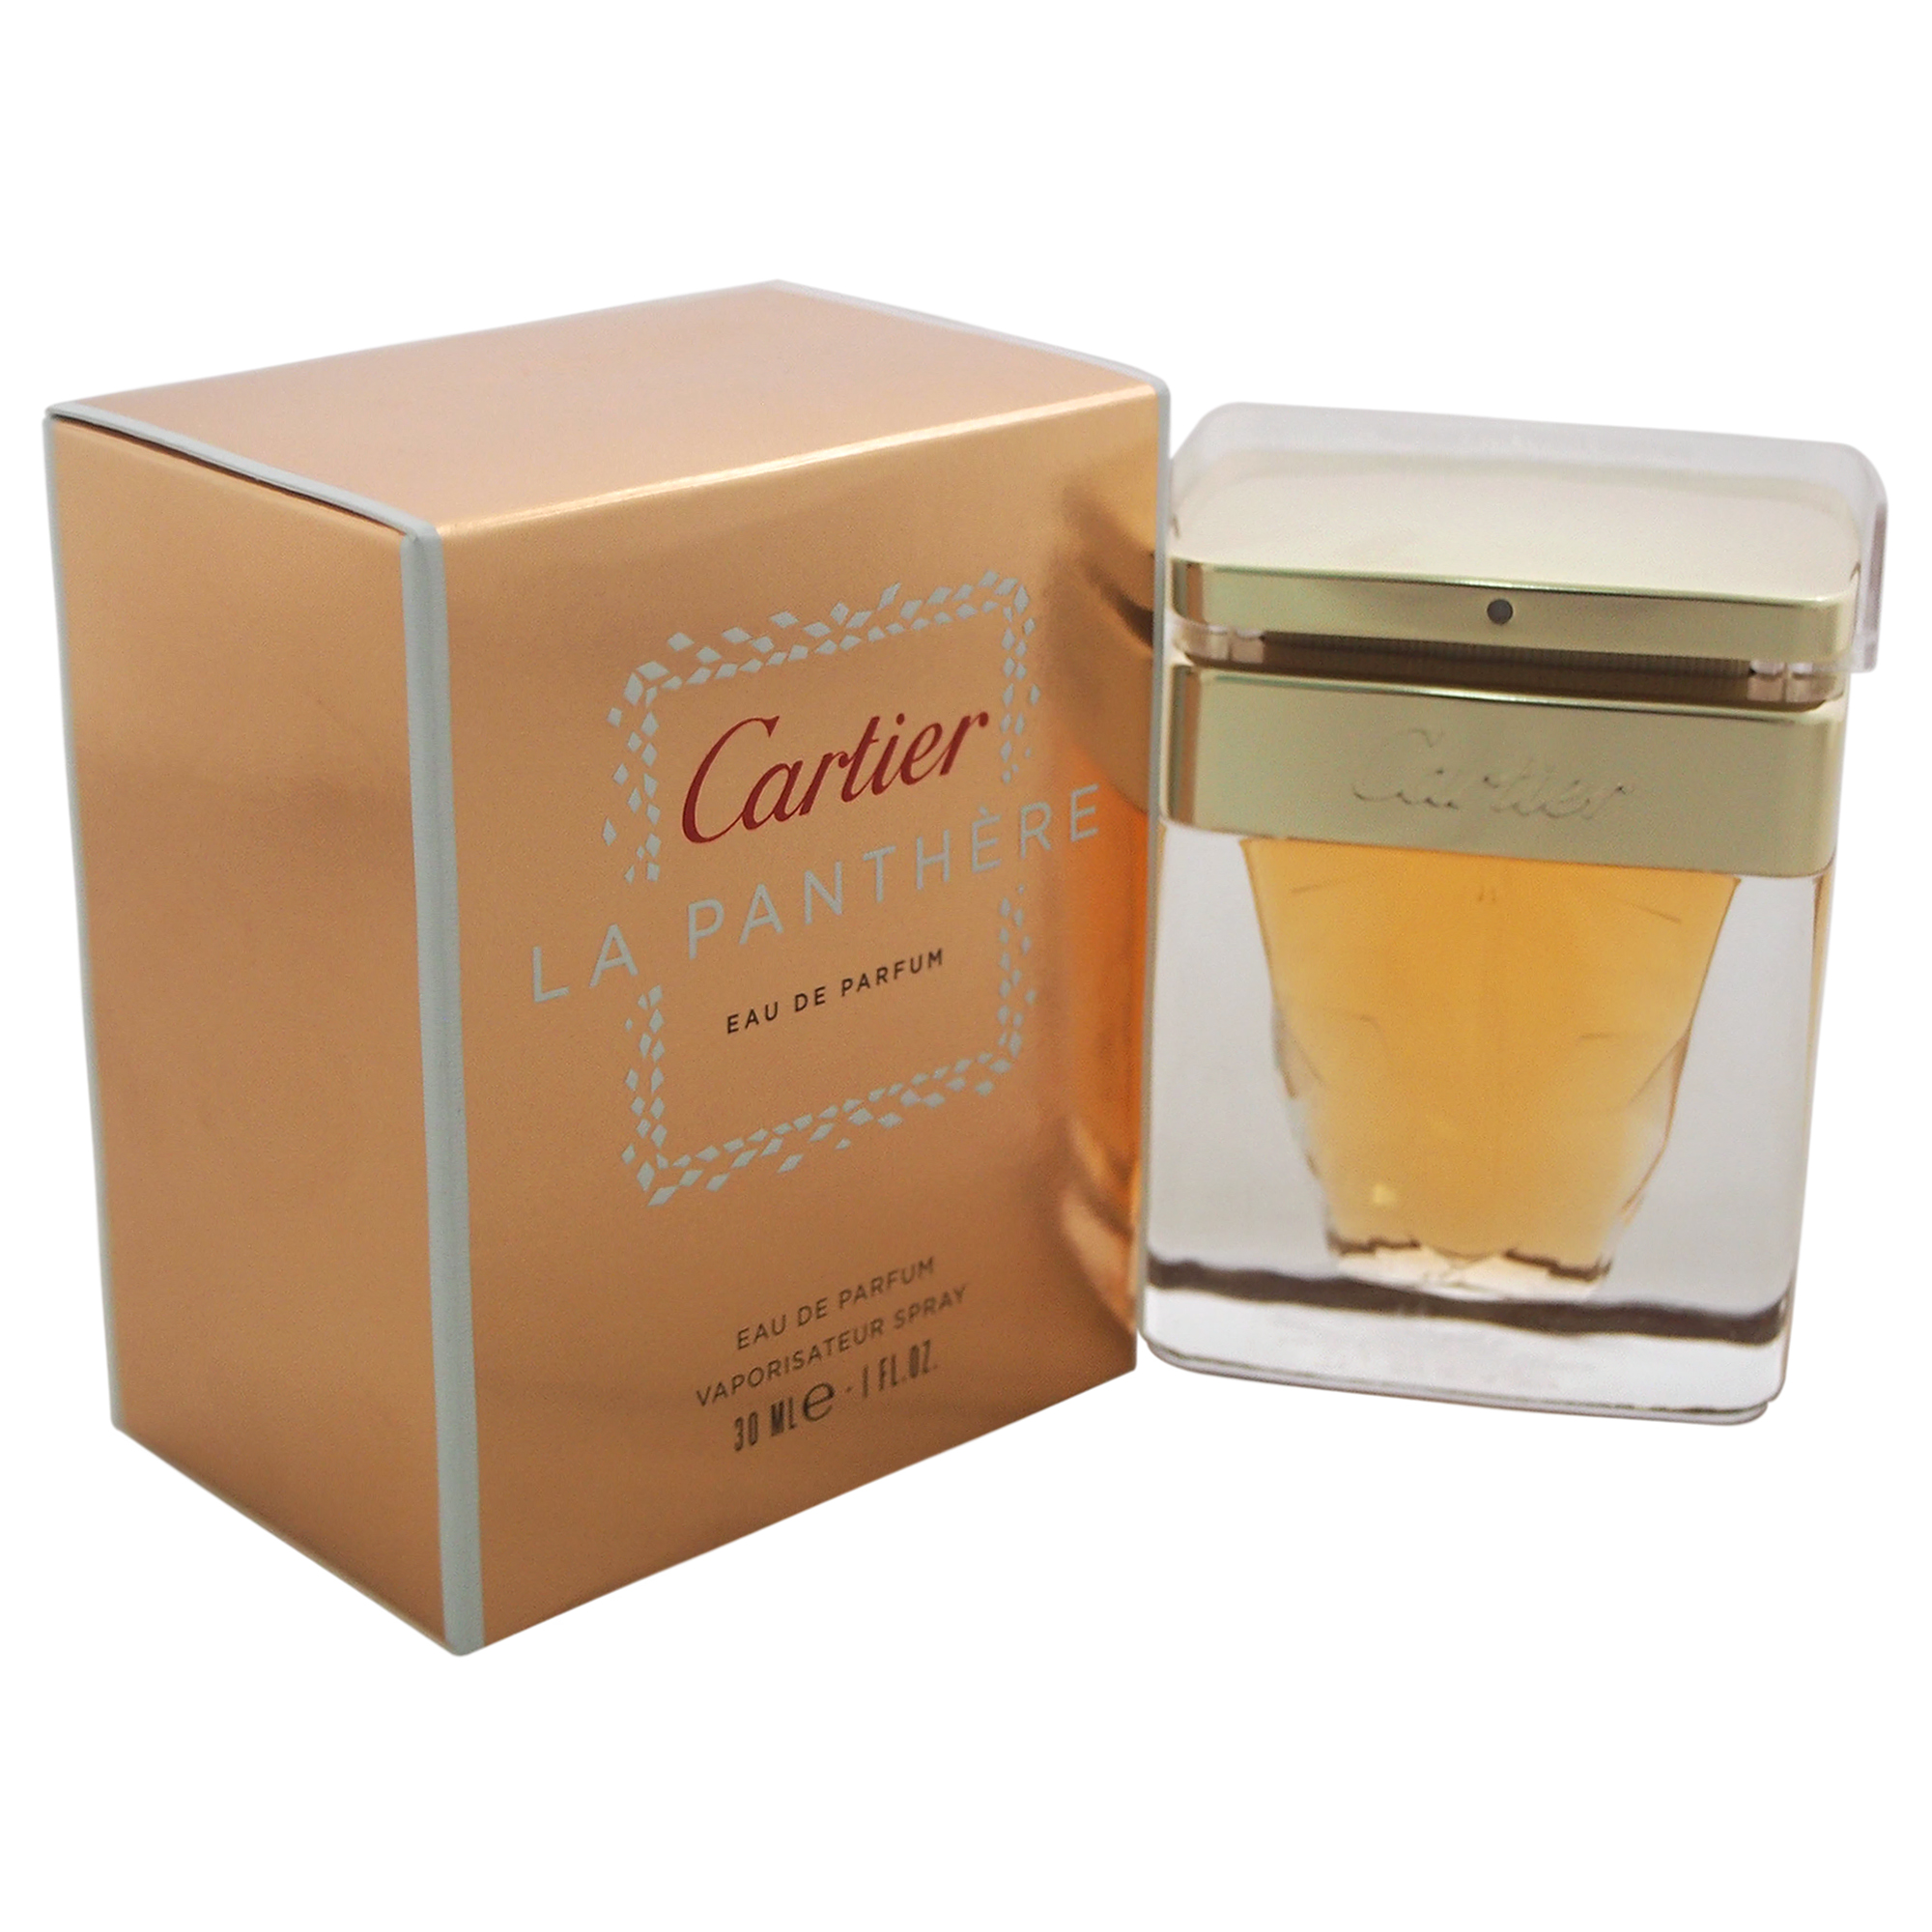 La Panthere by Cartier for Women - 1 oz EDP Spray